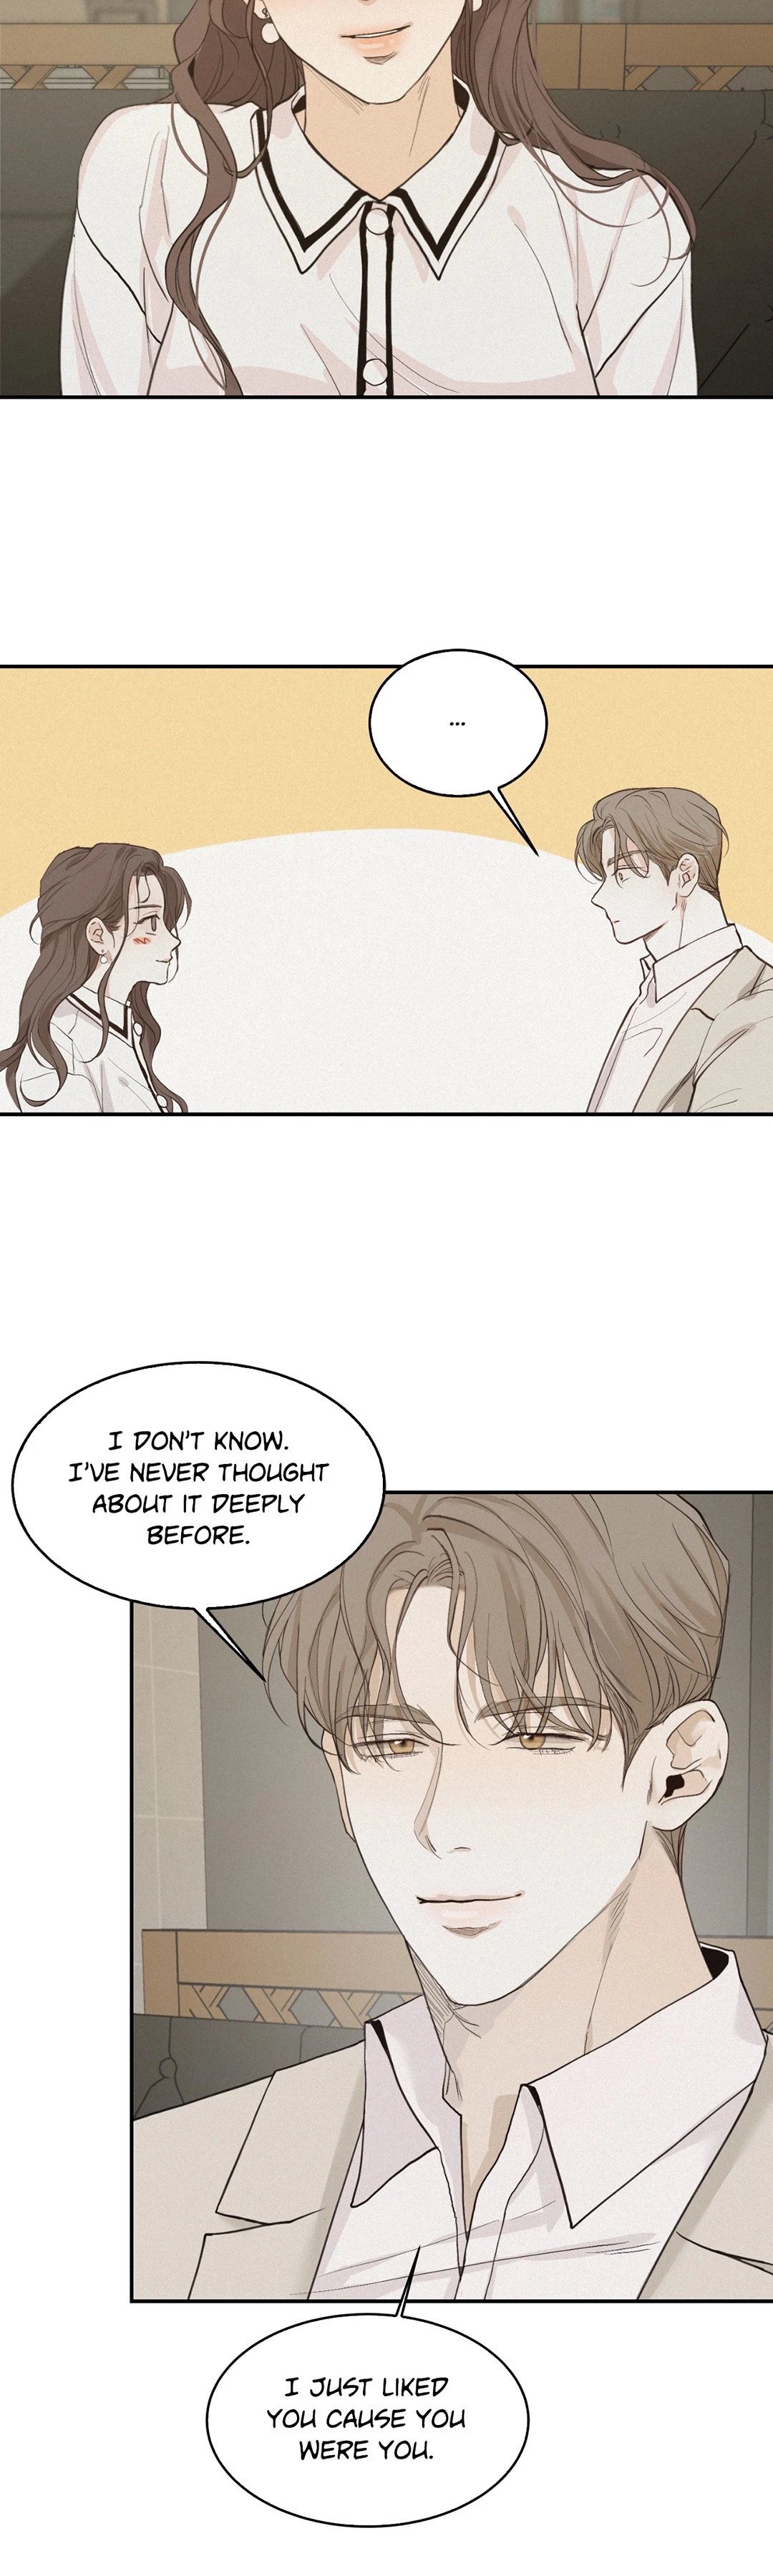 the-men-in-my-bed-chap-34-20